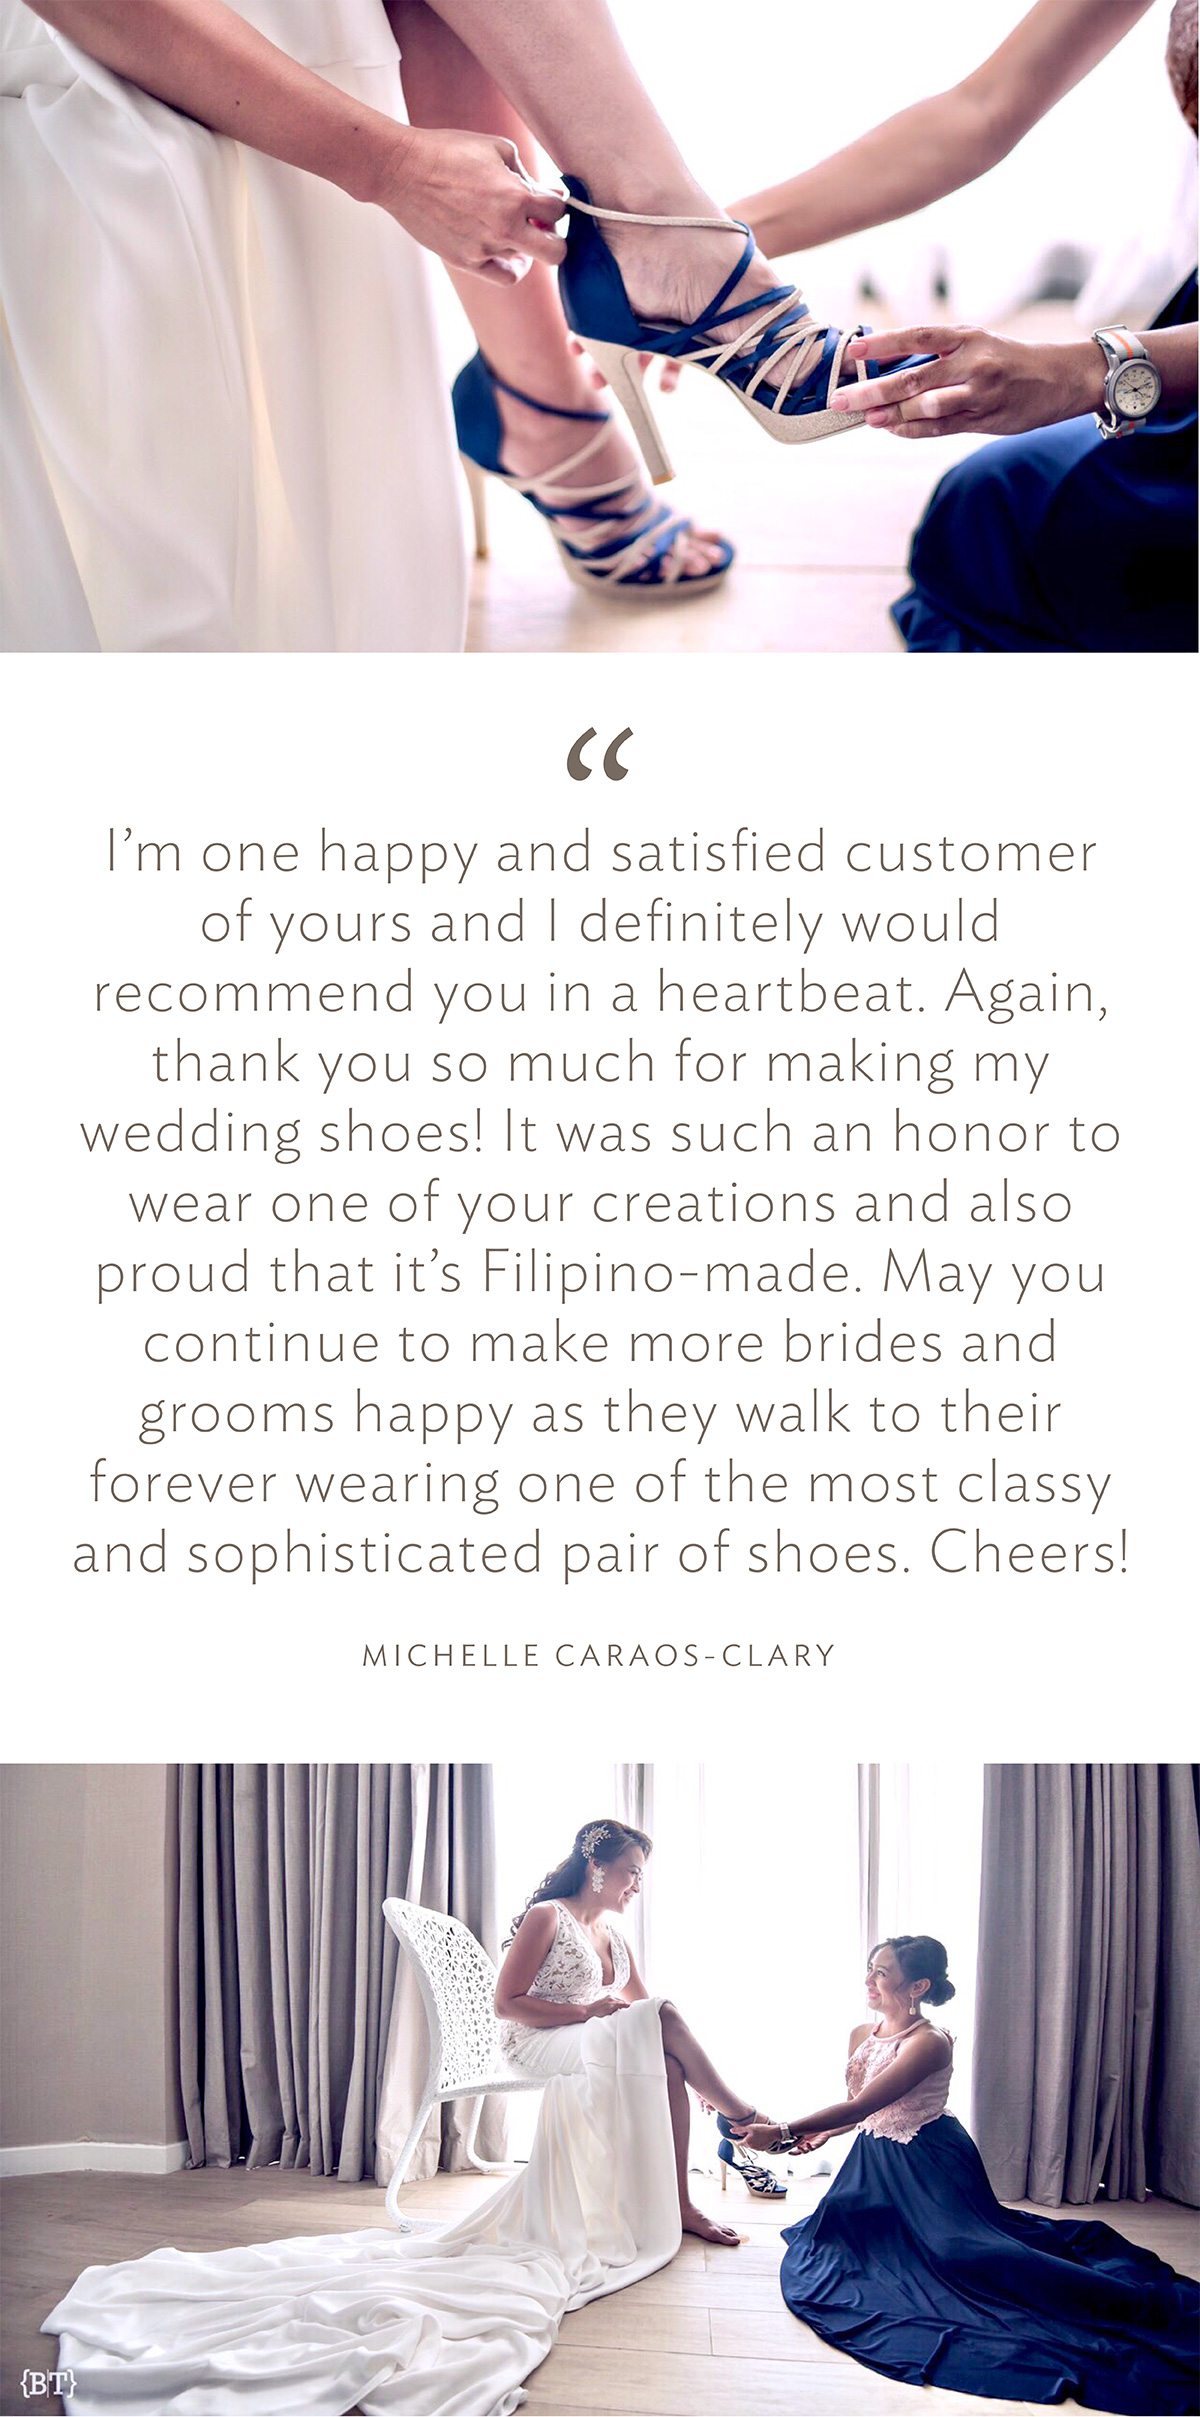 “I’m one happy and satisfied customer of yours and I definitely would recommend you in a heartbeat. Again, thank you so much for making my wedding shoes! It was such an honor to wear one of your creations and also proud that it’s Filipino-made. May you continue to make more brides and grooms happy as they walk to their forever wearing one of the most classy and sophisticated pair of shoes. Cheers!” (Michelle Caraos-Clary)